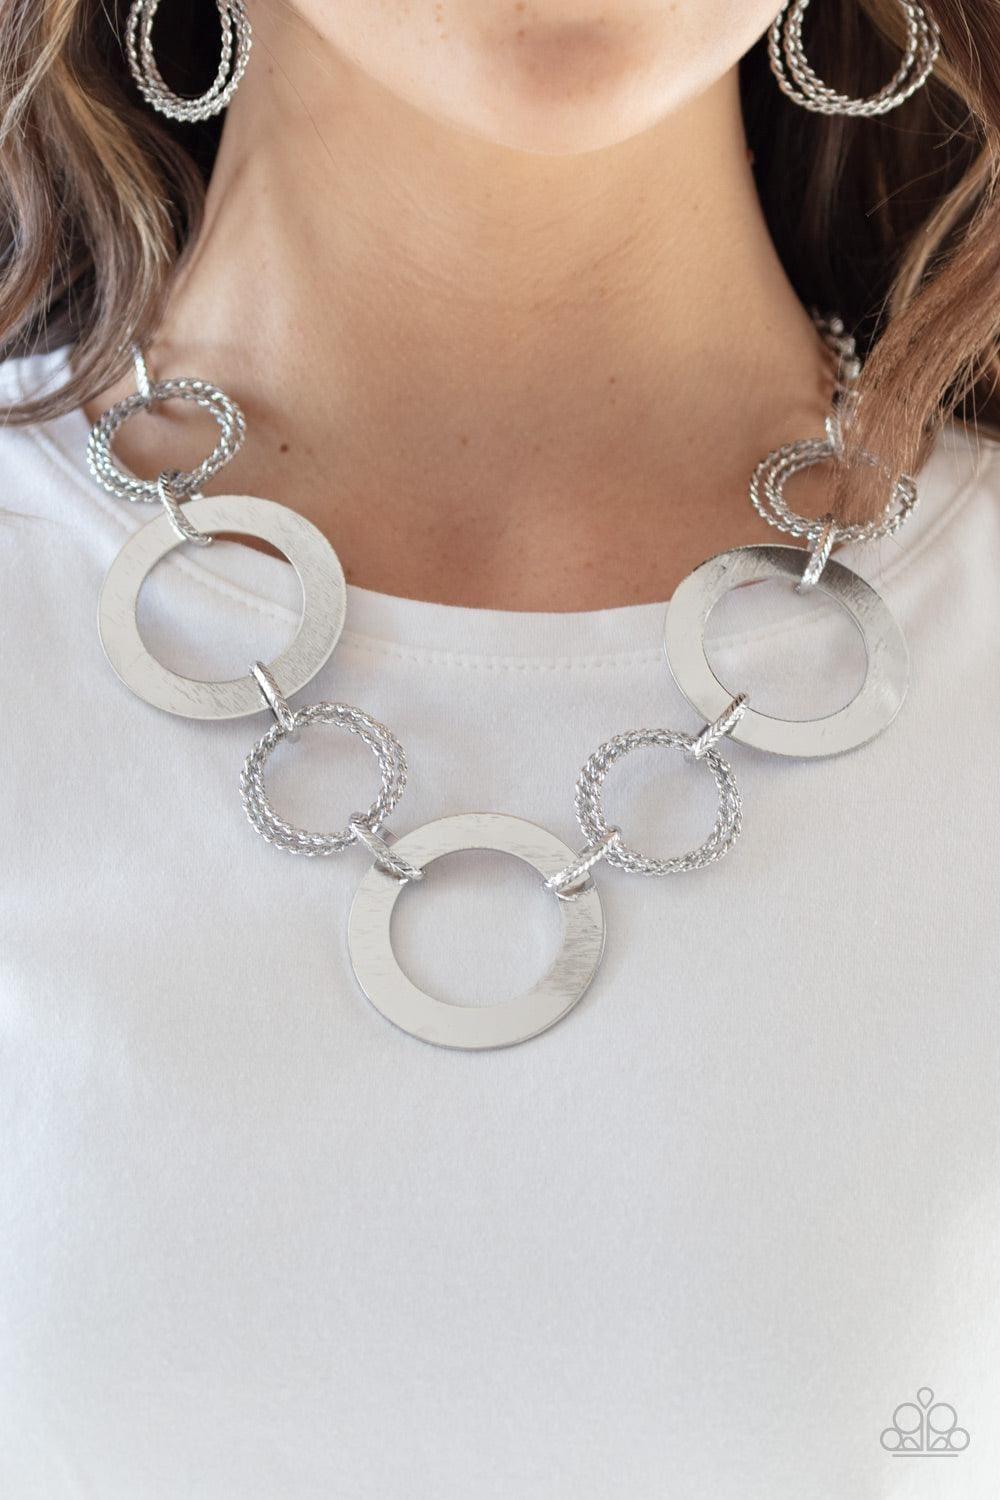 Paparazzi Accessories - Ringed In Radiance - Silver Necklace - Bling by JessieK